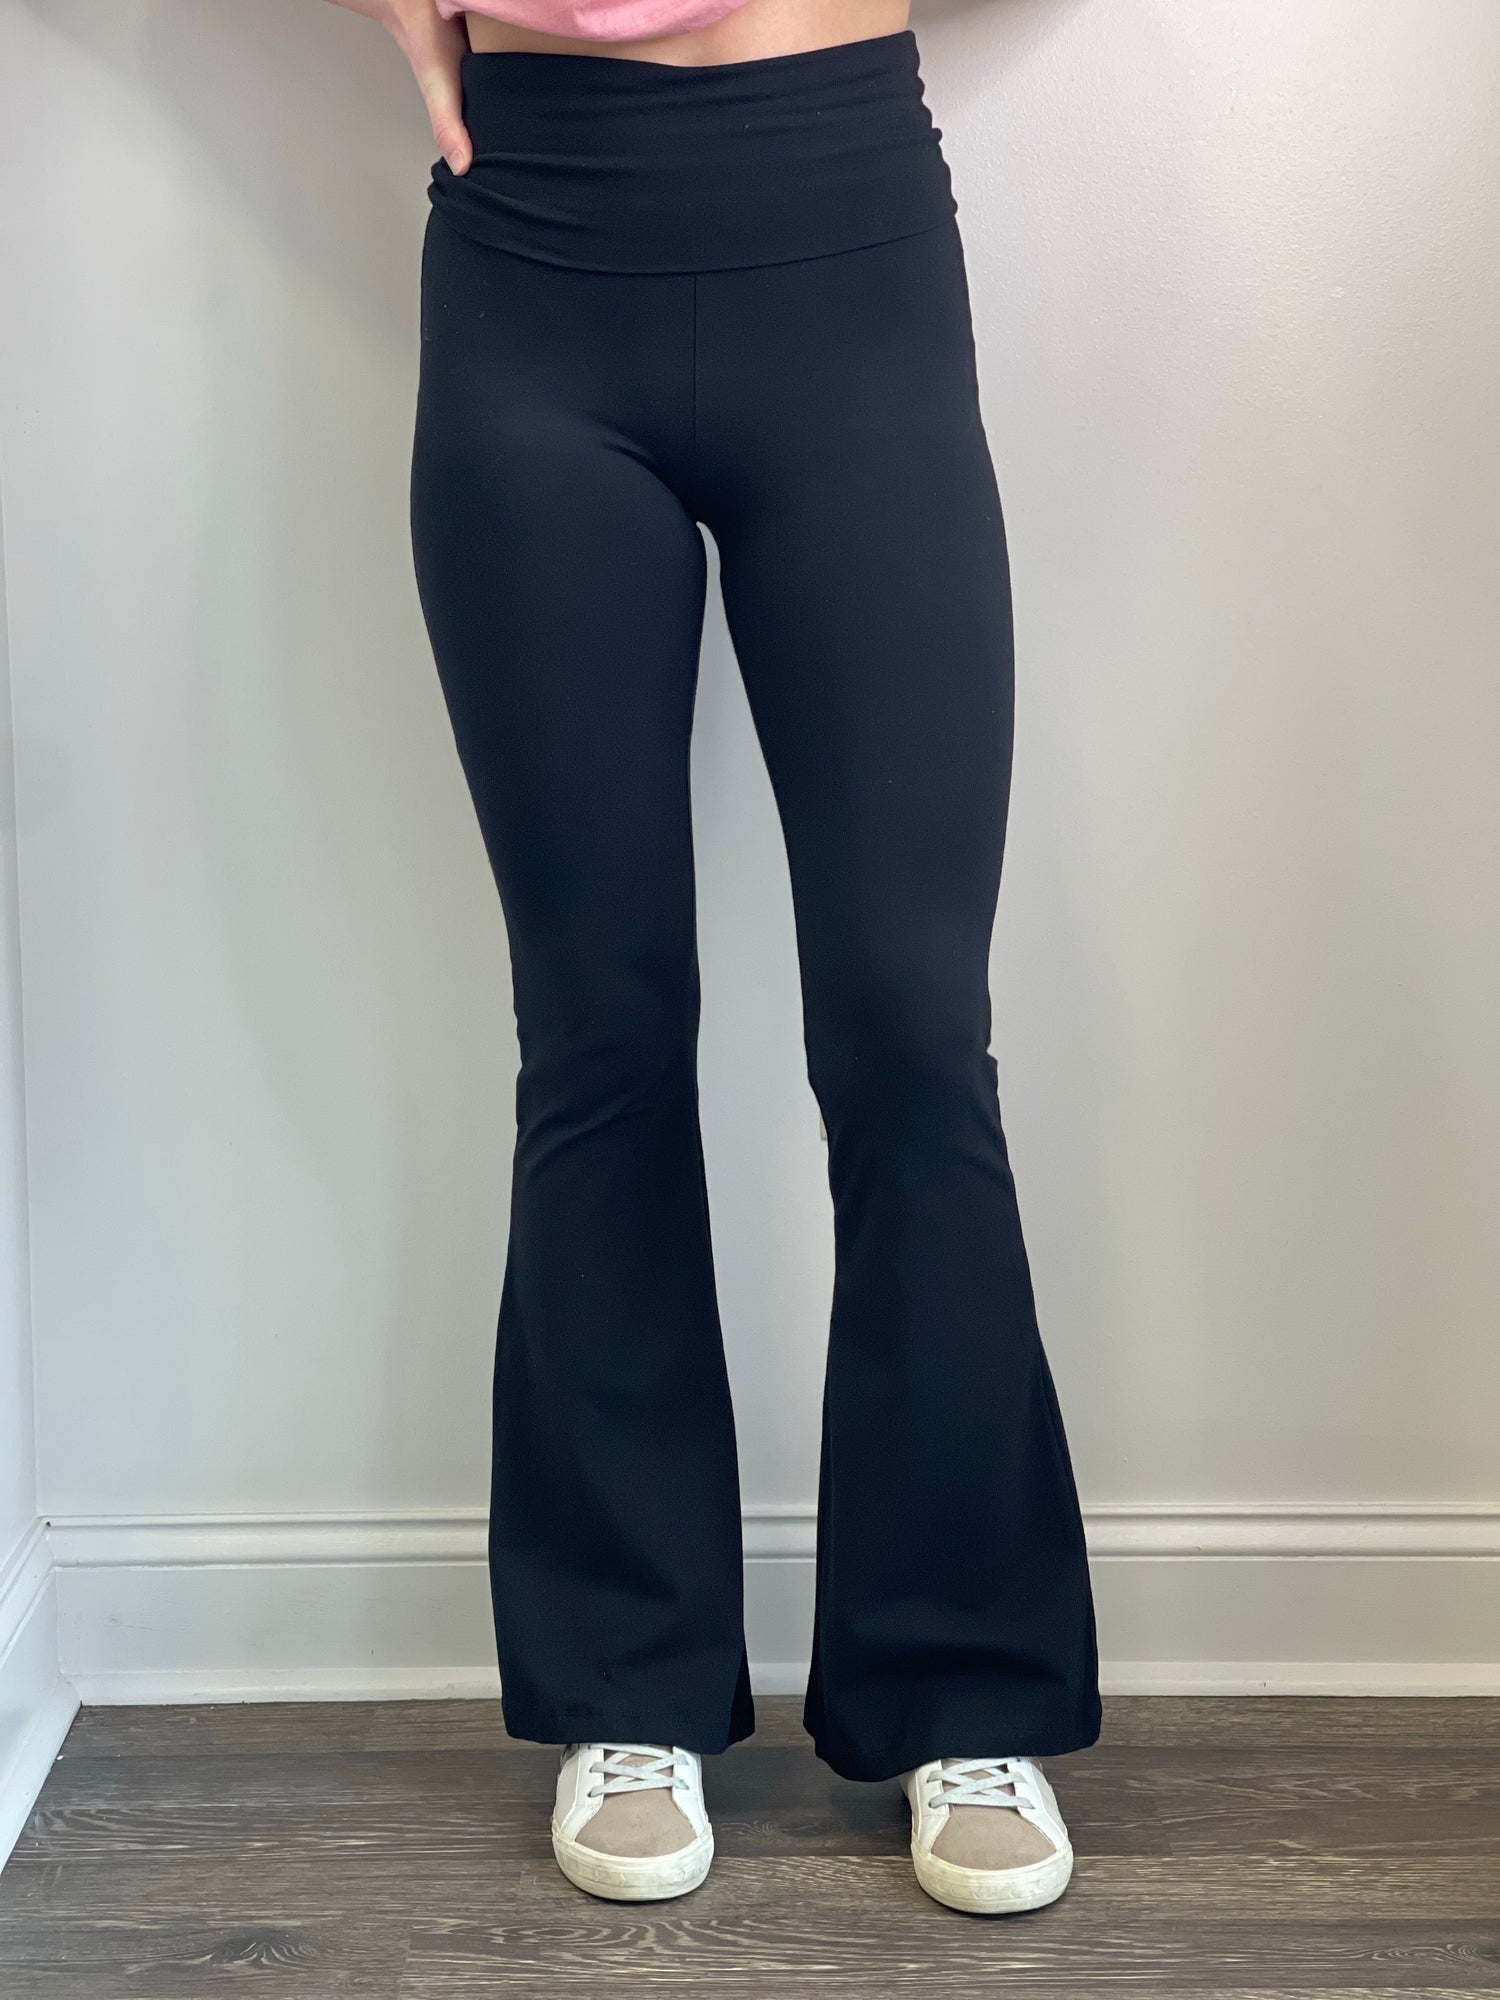 Marjorie Fold Over Flare Yoga Pants – Allie and Me Boutique